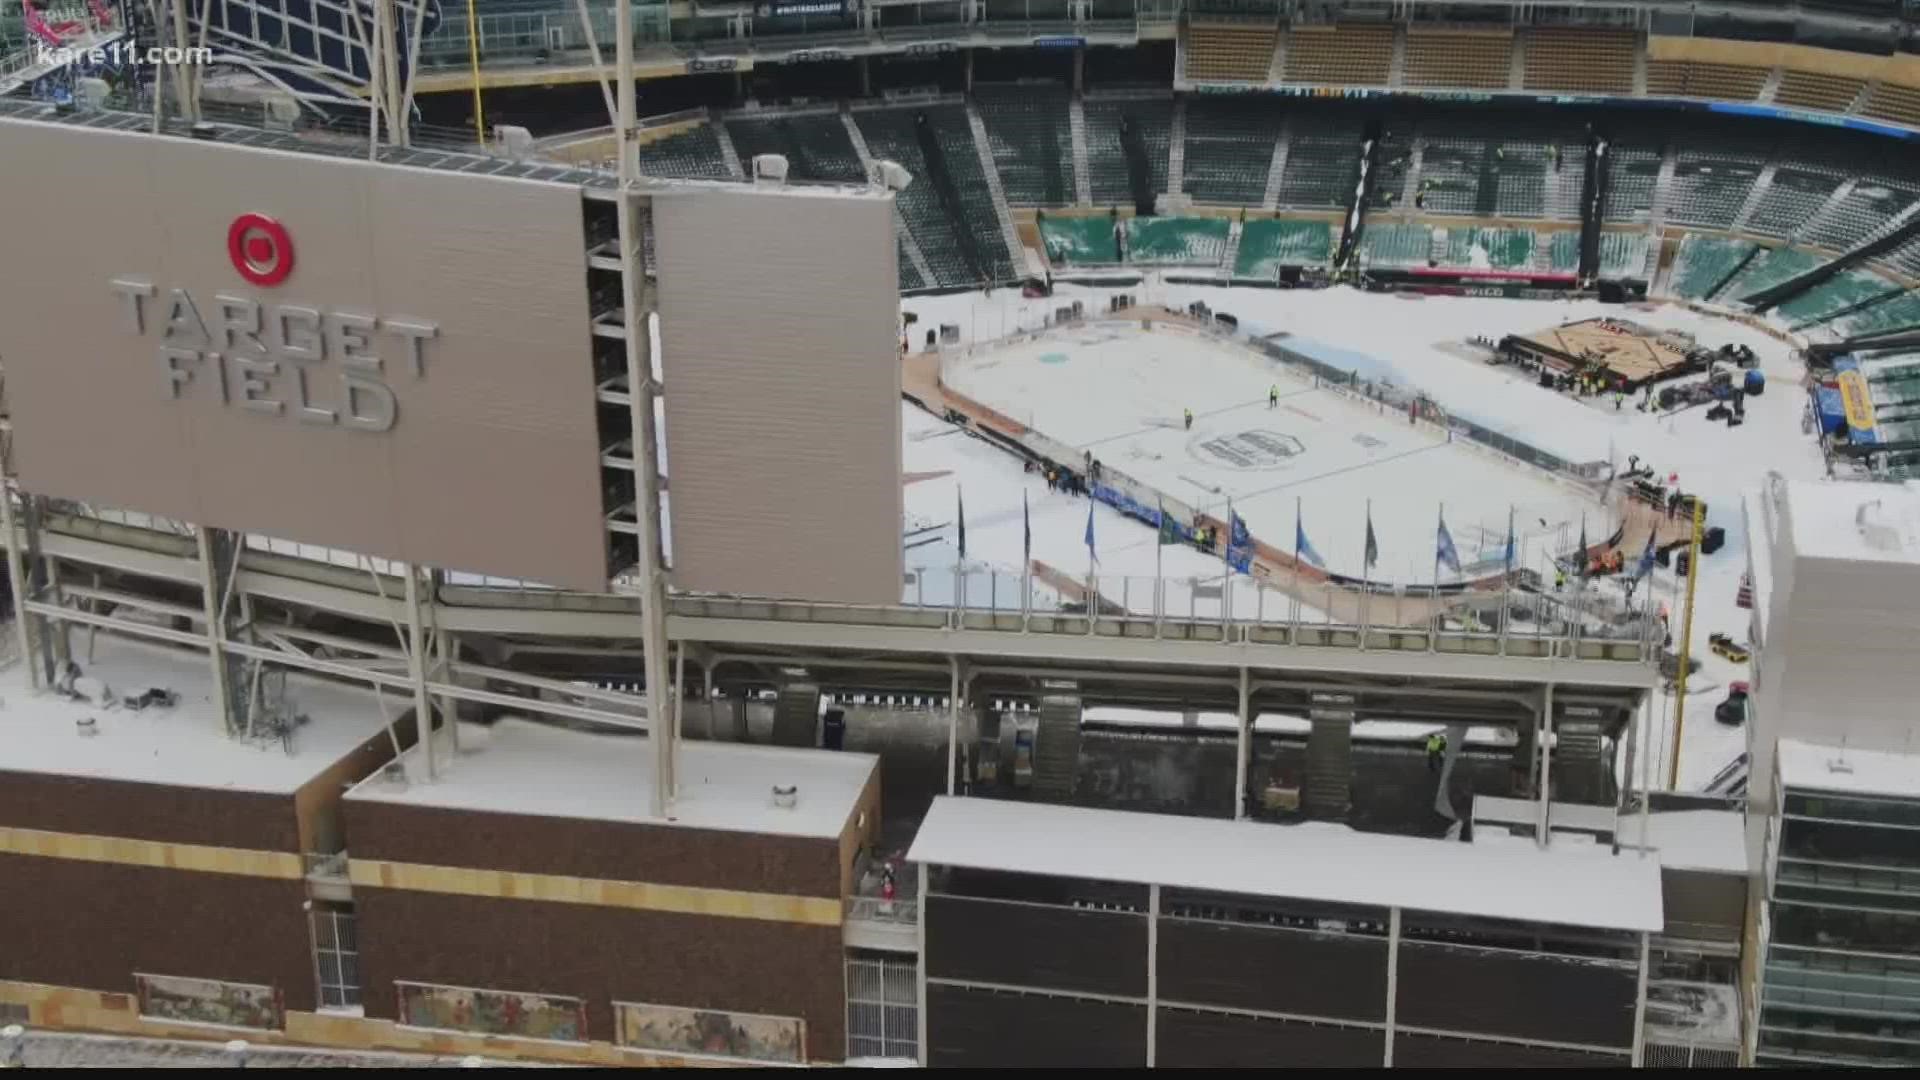 Saturday's Winter Classic could be the coldest outdoor event in NHL history. But Minnesotans aren't scared.